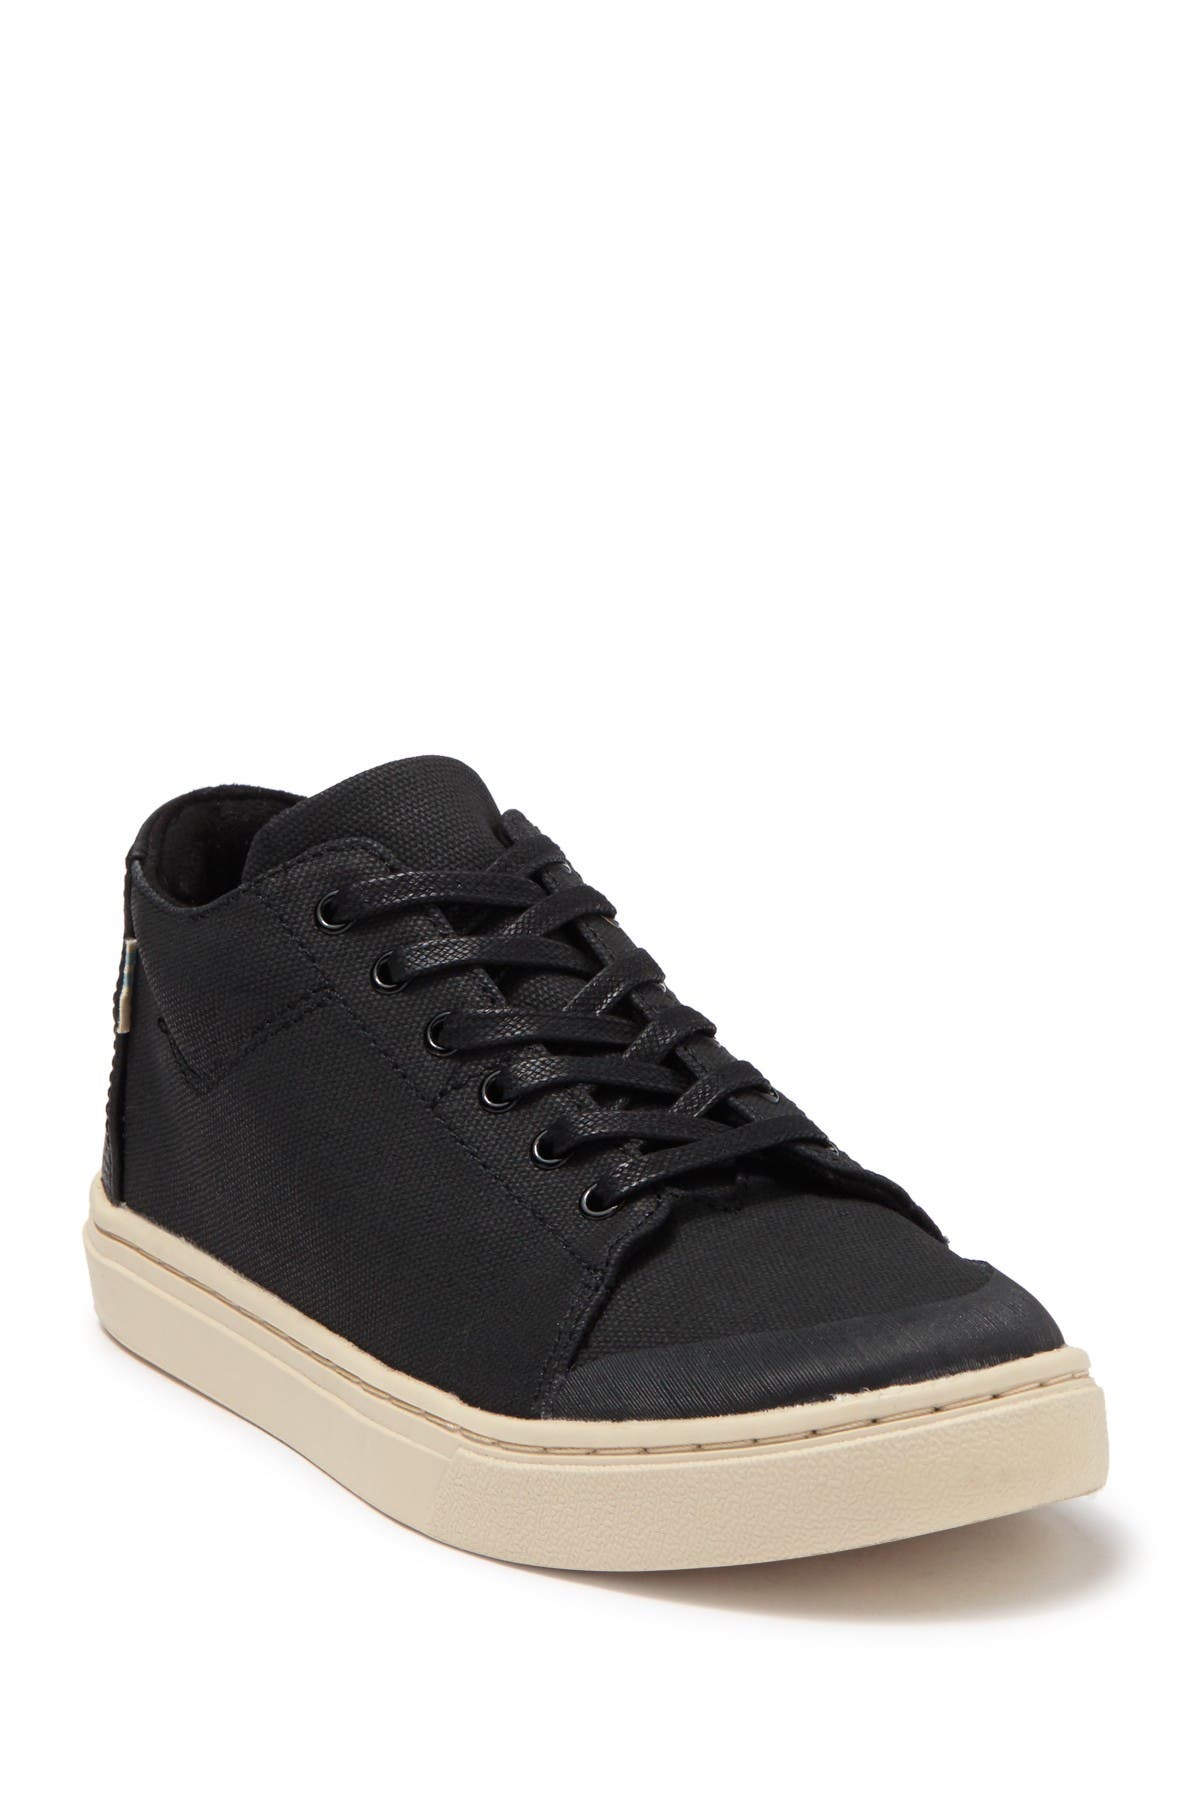 TOMS | Lenny Mid Lace-Up Sneaker 